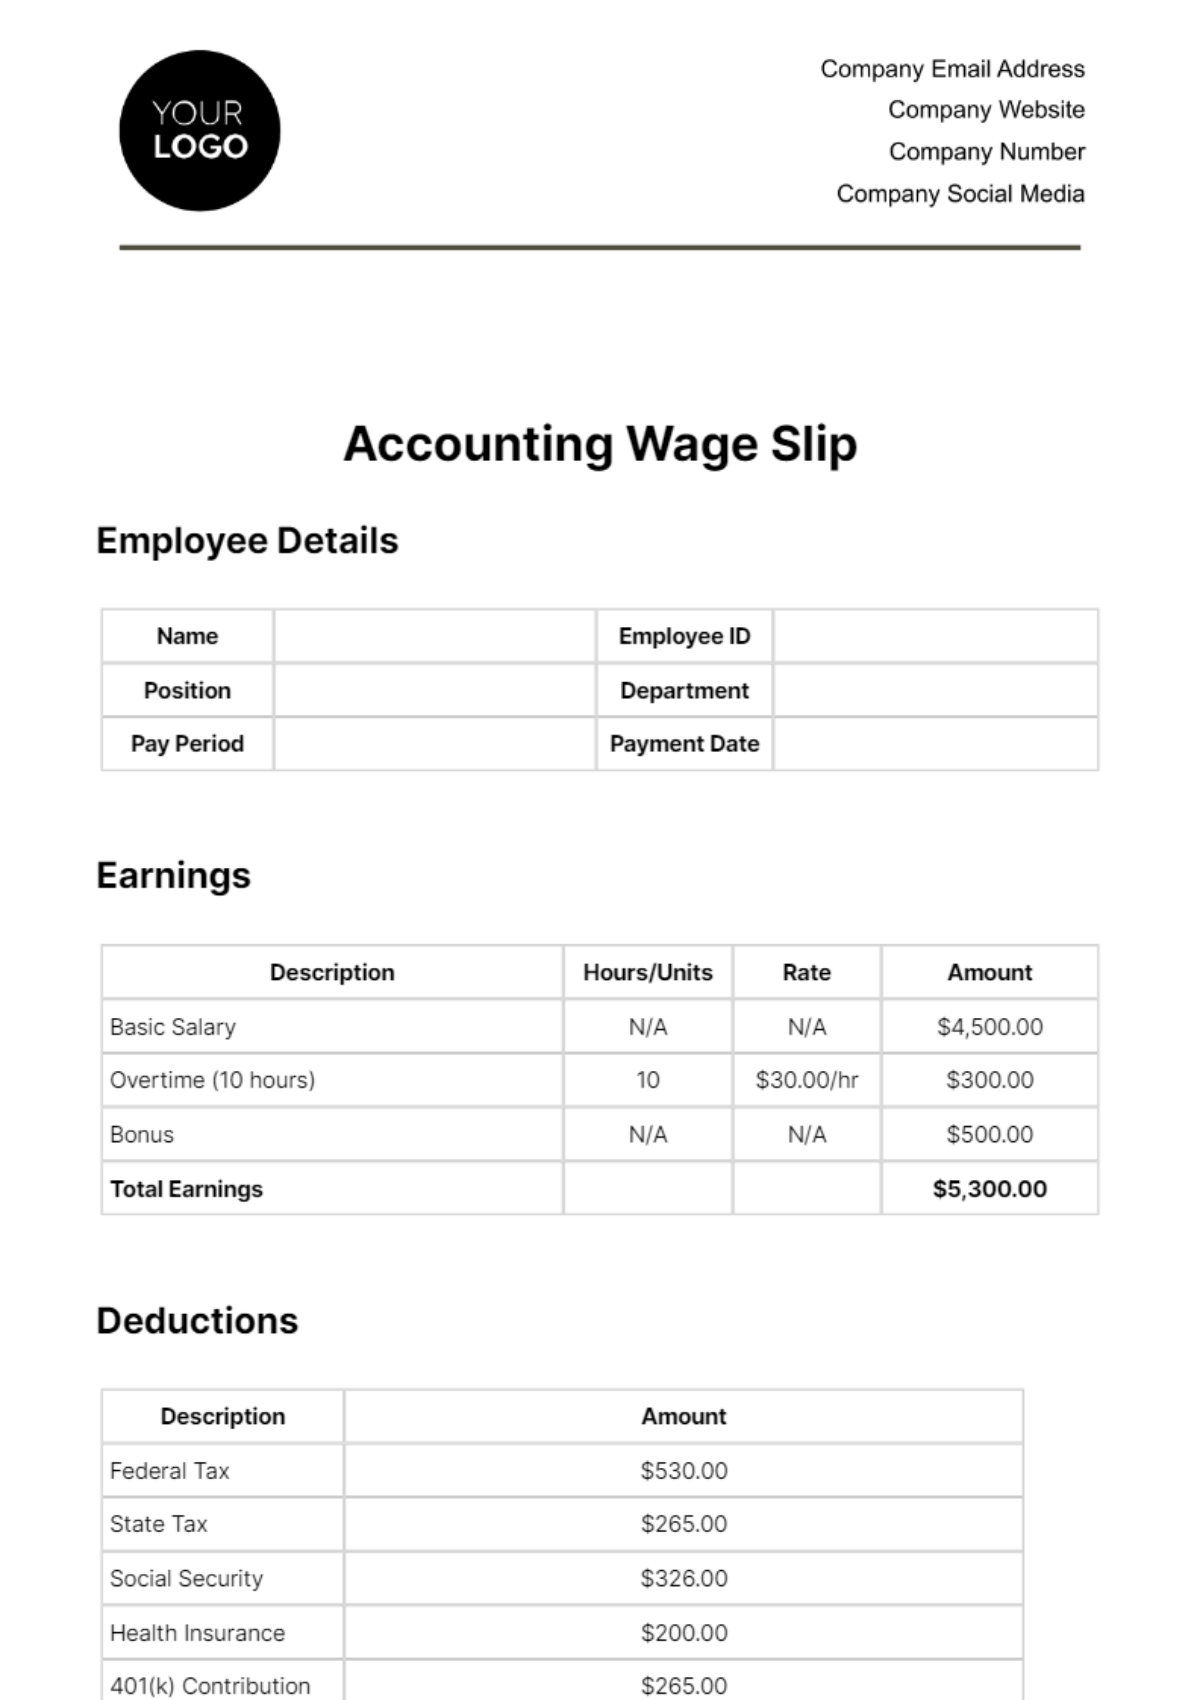 Accounting Wage Slip Template